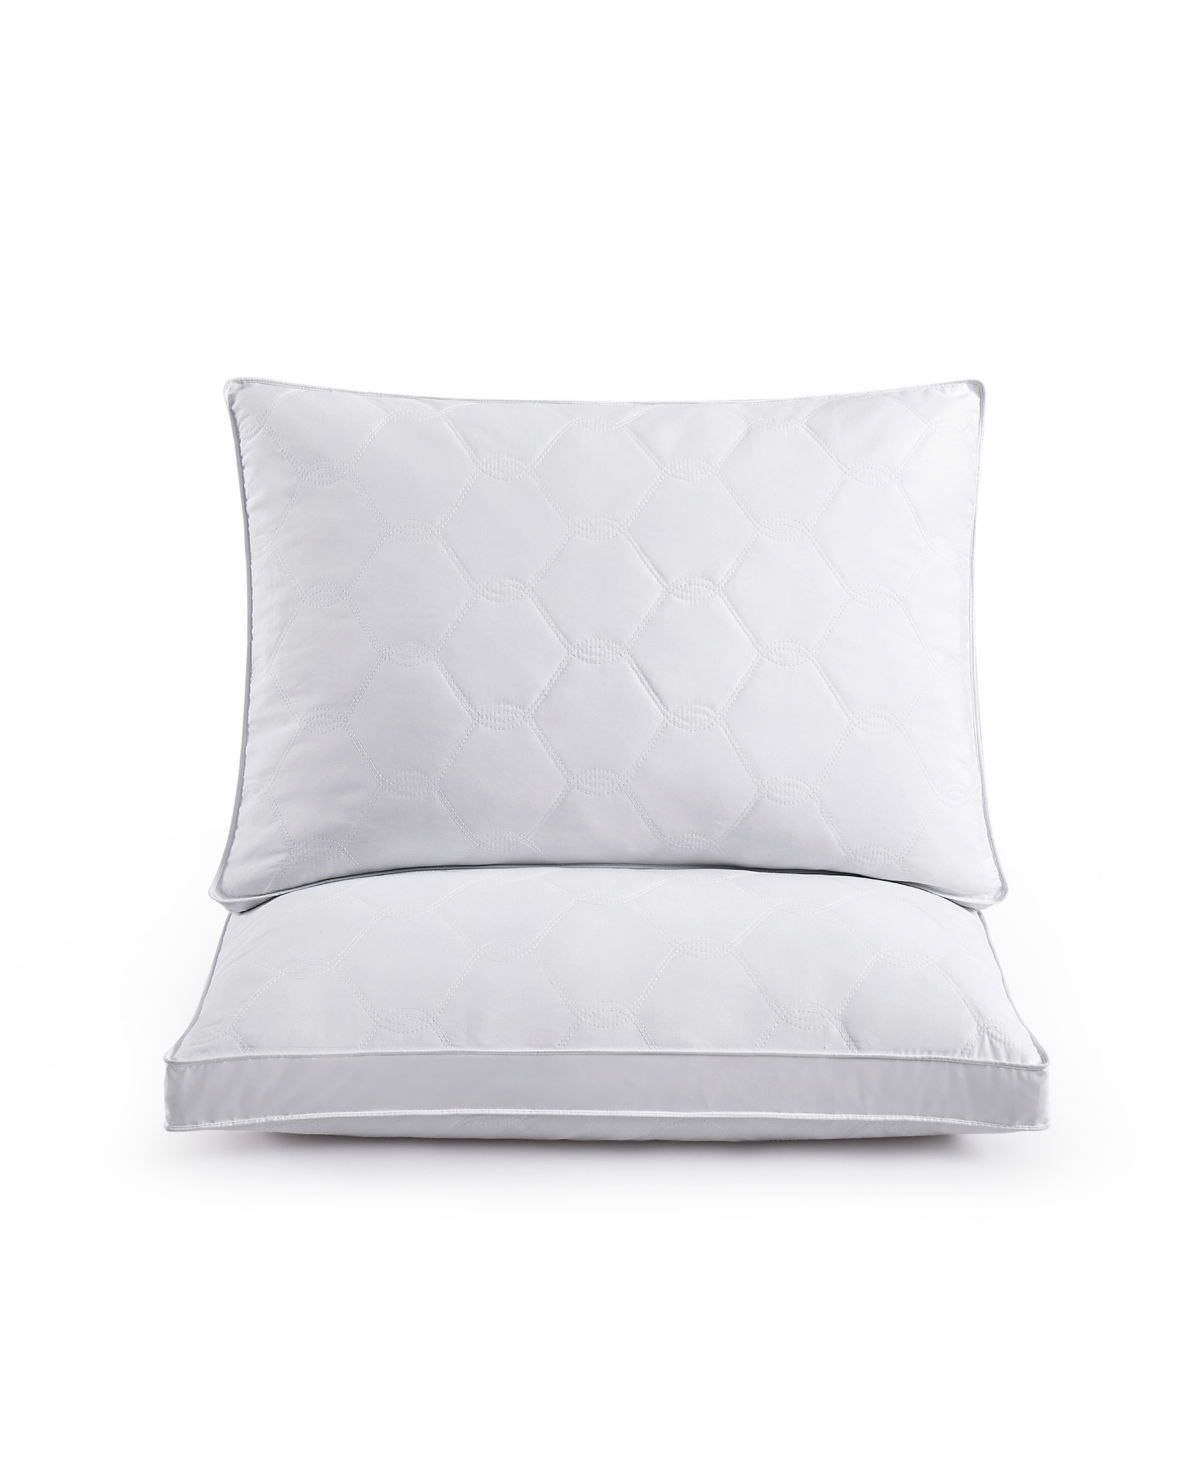 Unikome Diamond Quilted Down And Feather With Gusseted Edge 2-pack Pillows, King In White